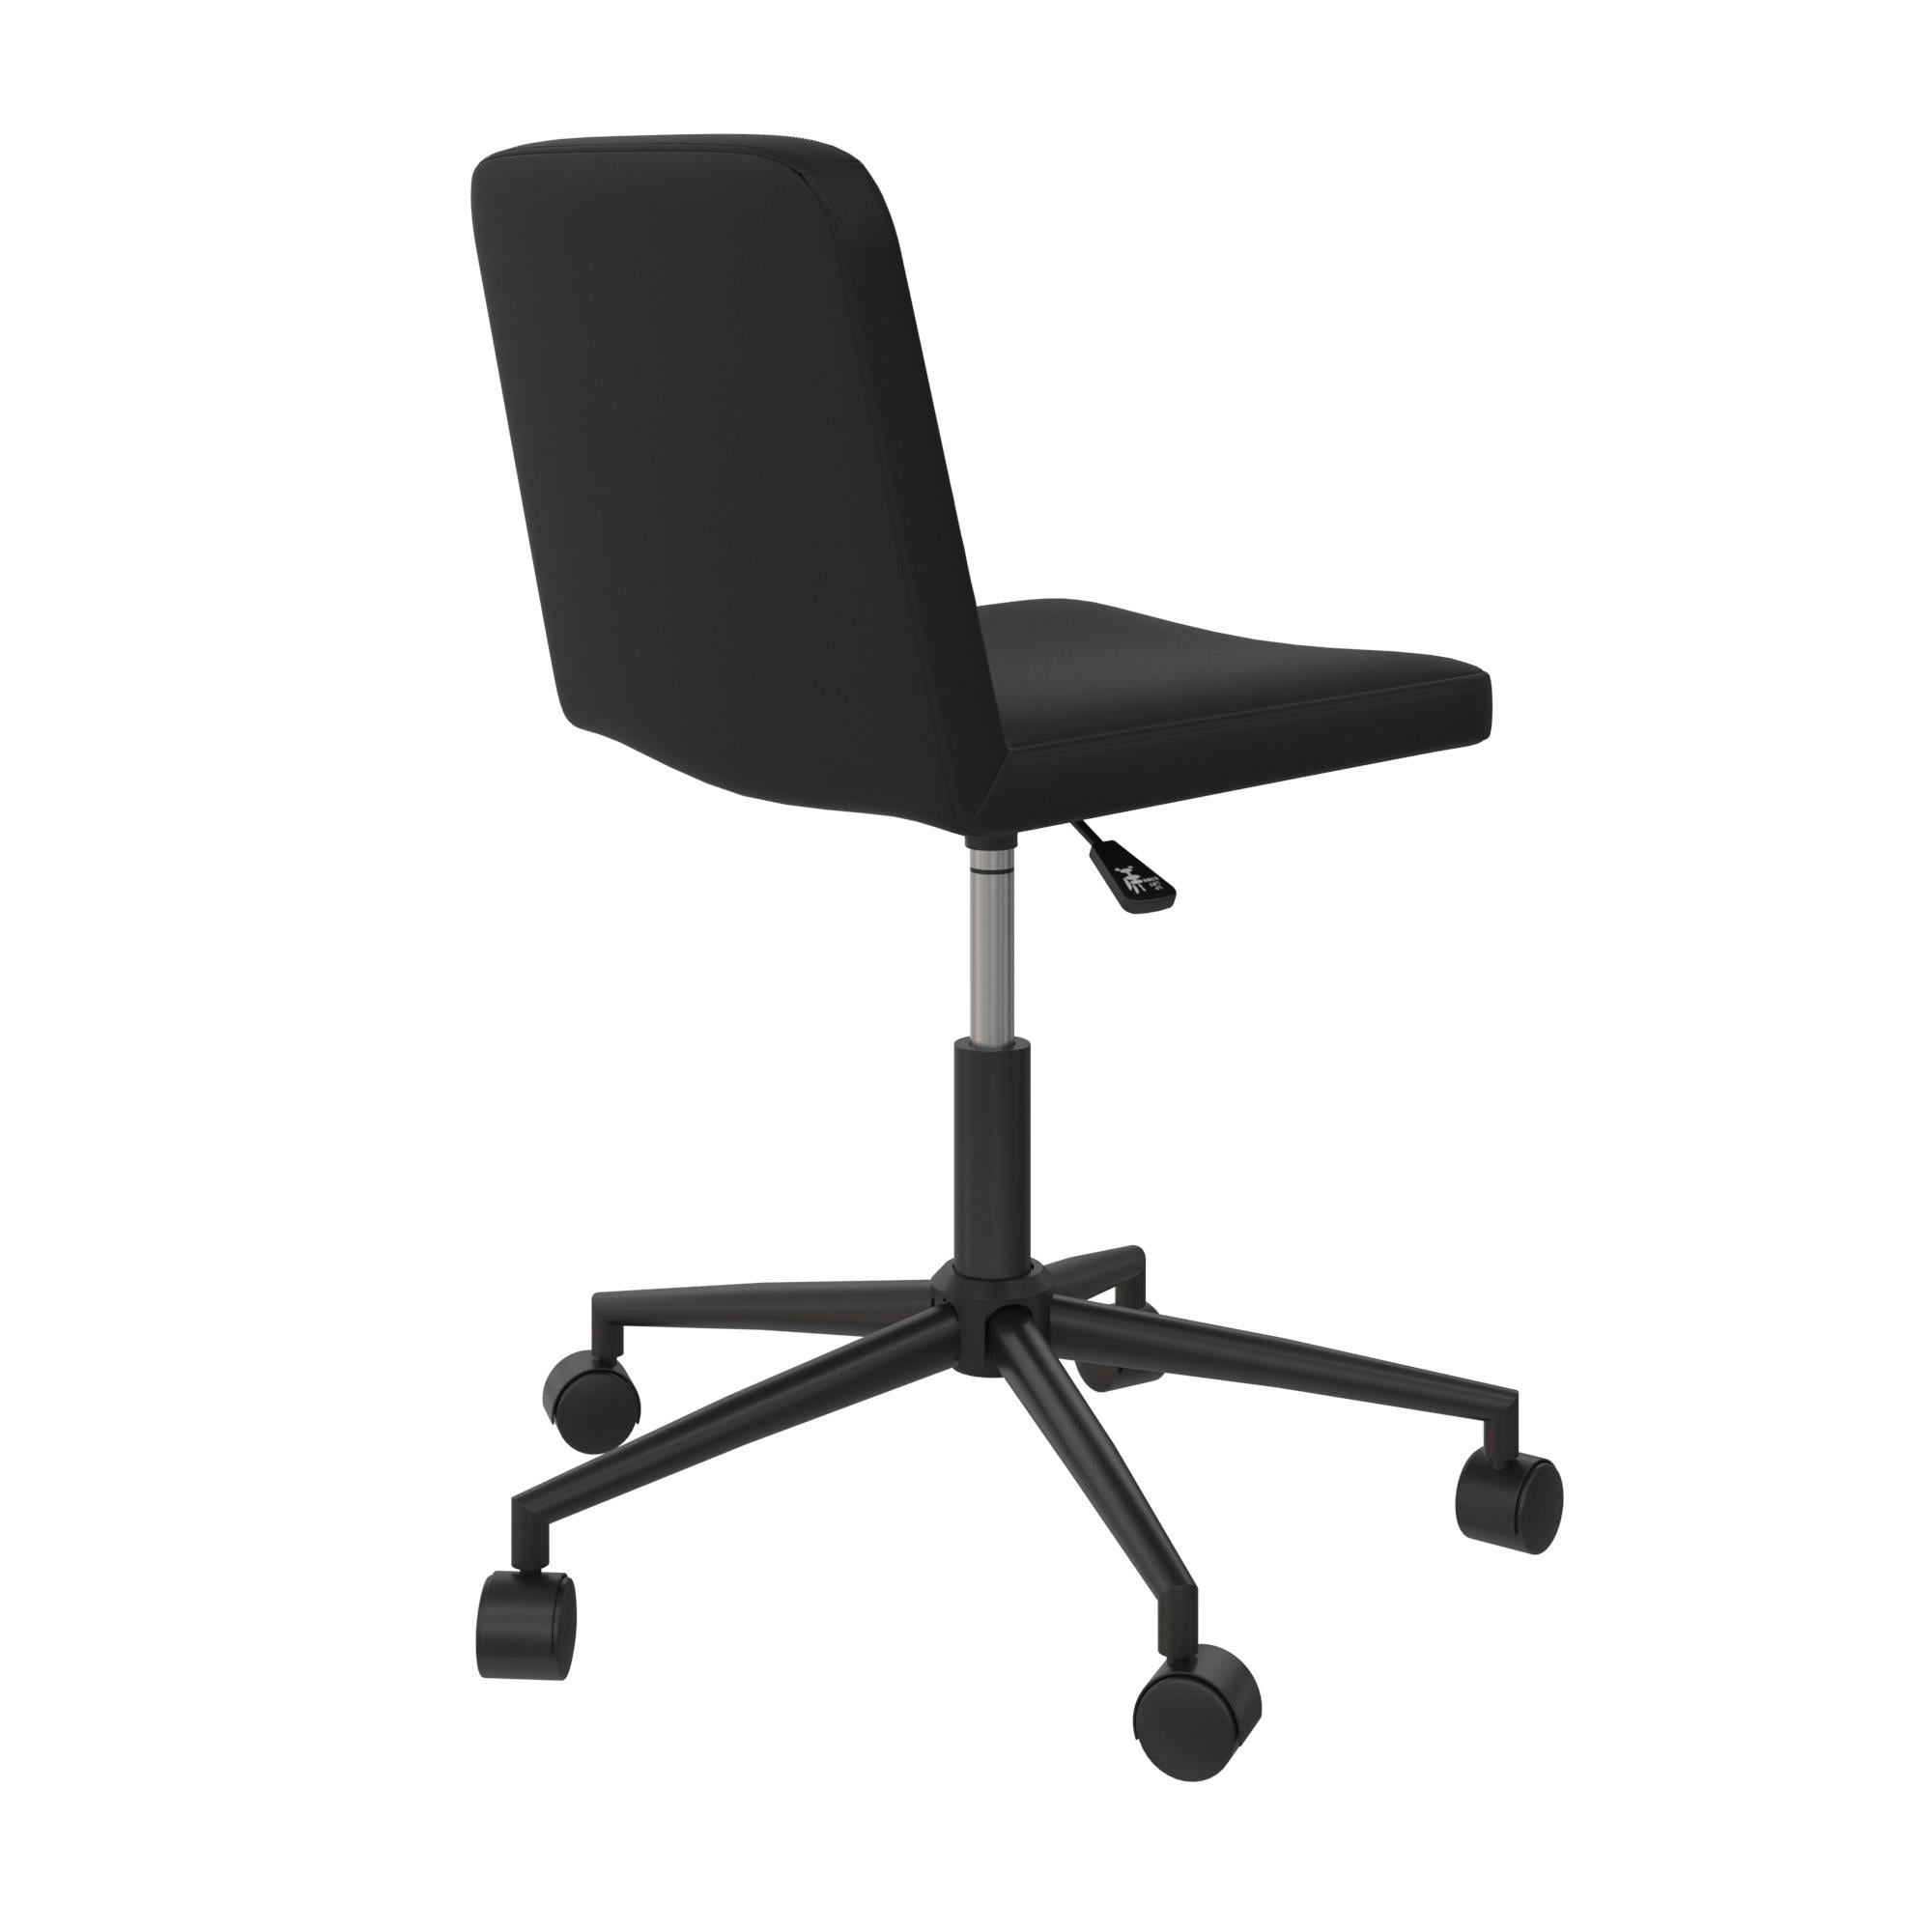 Queer Eye & with 250 Swivel, Adjustable Task Height Corey Capacity, Black Chair lb